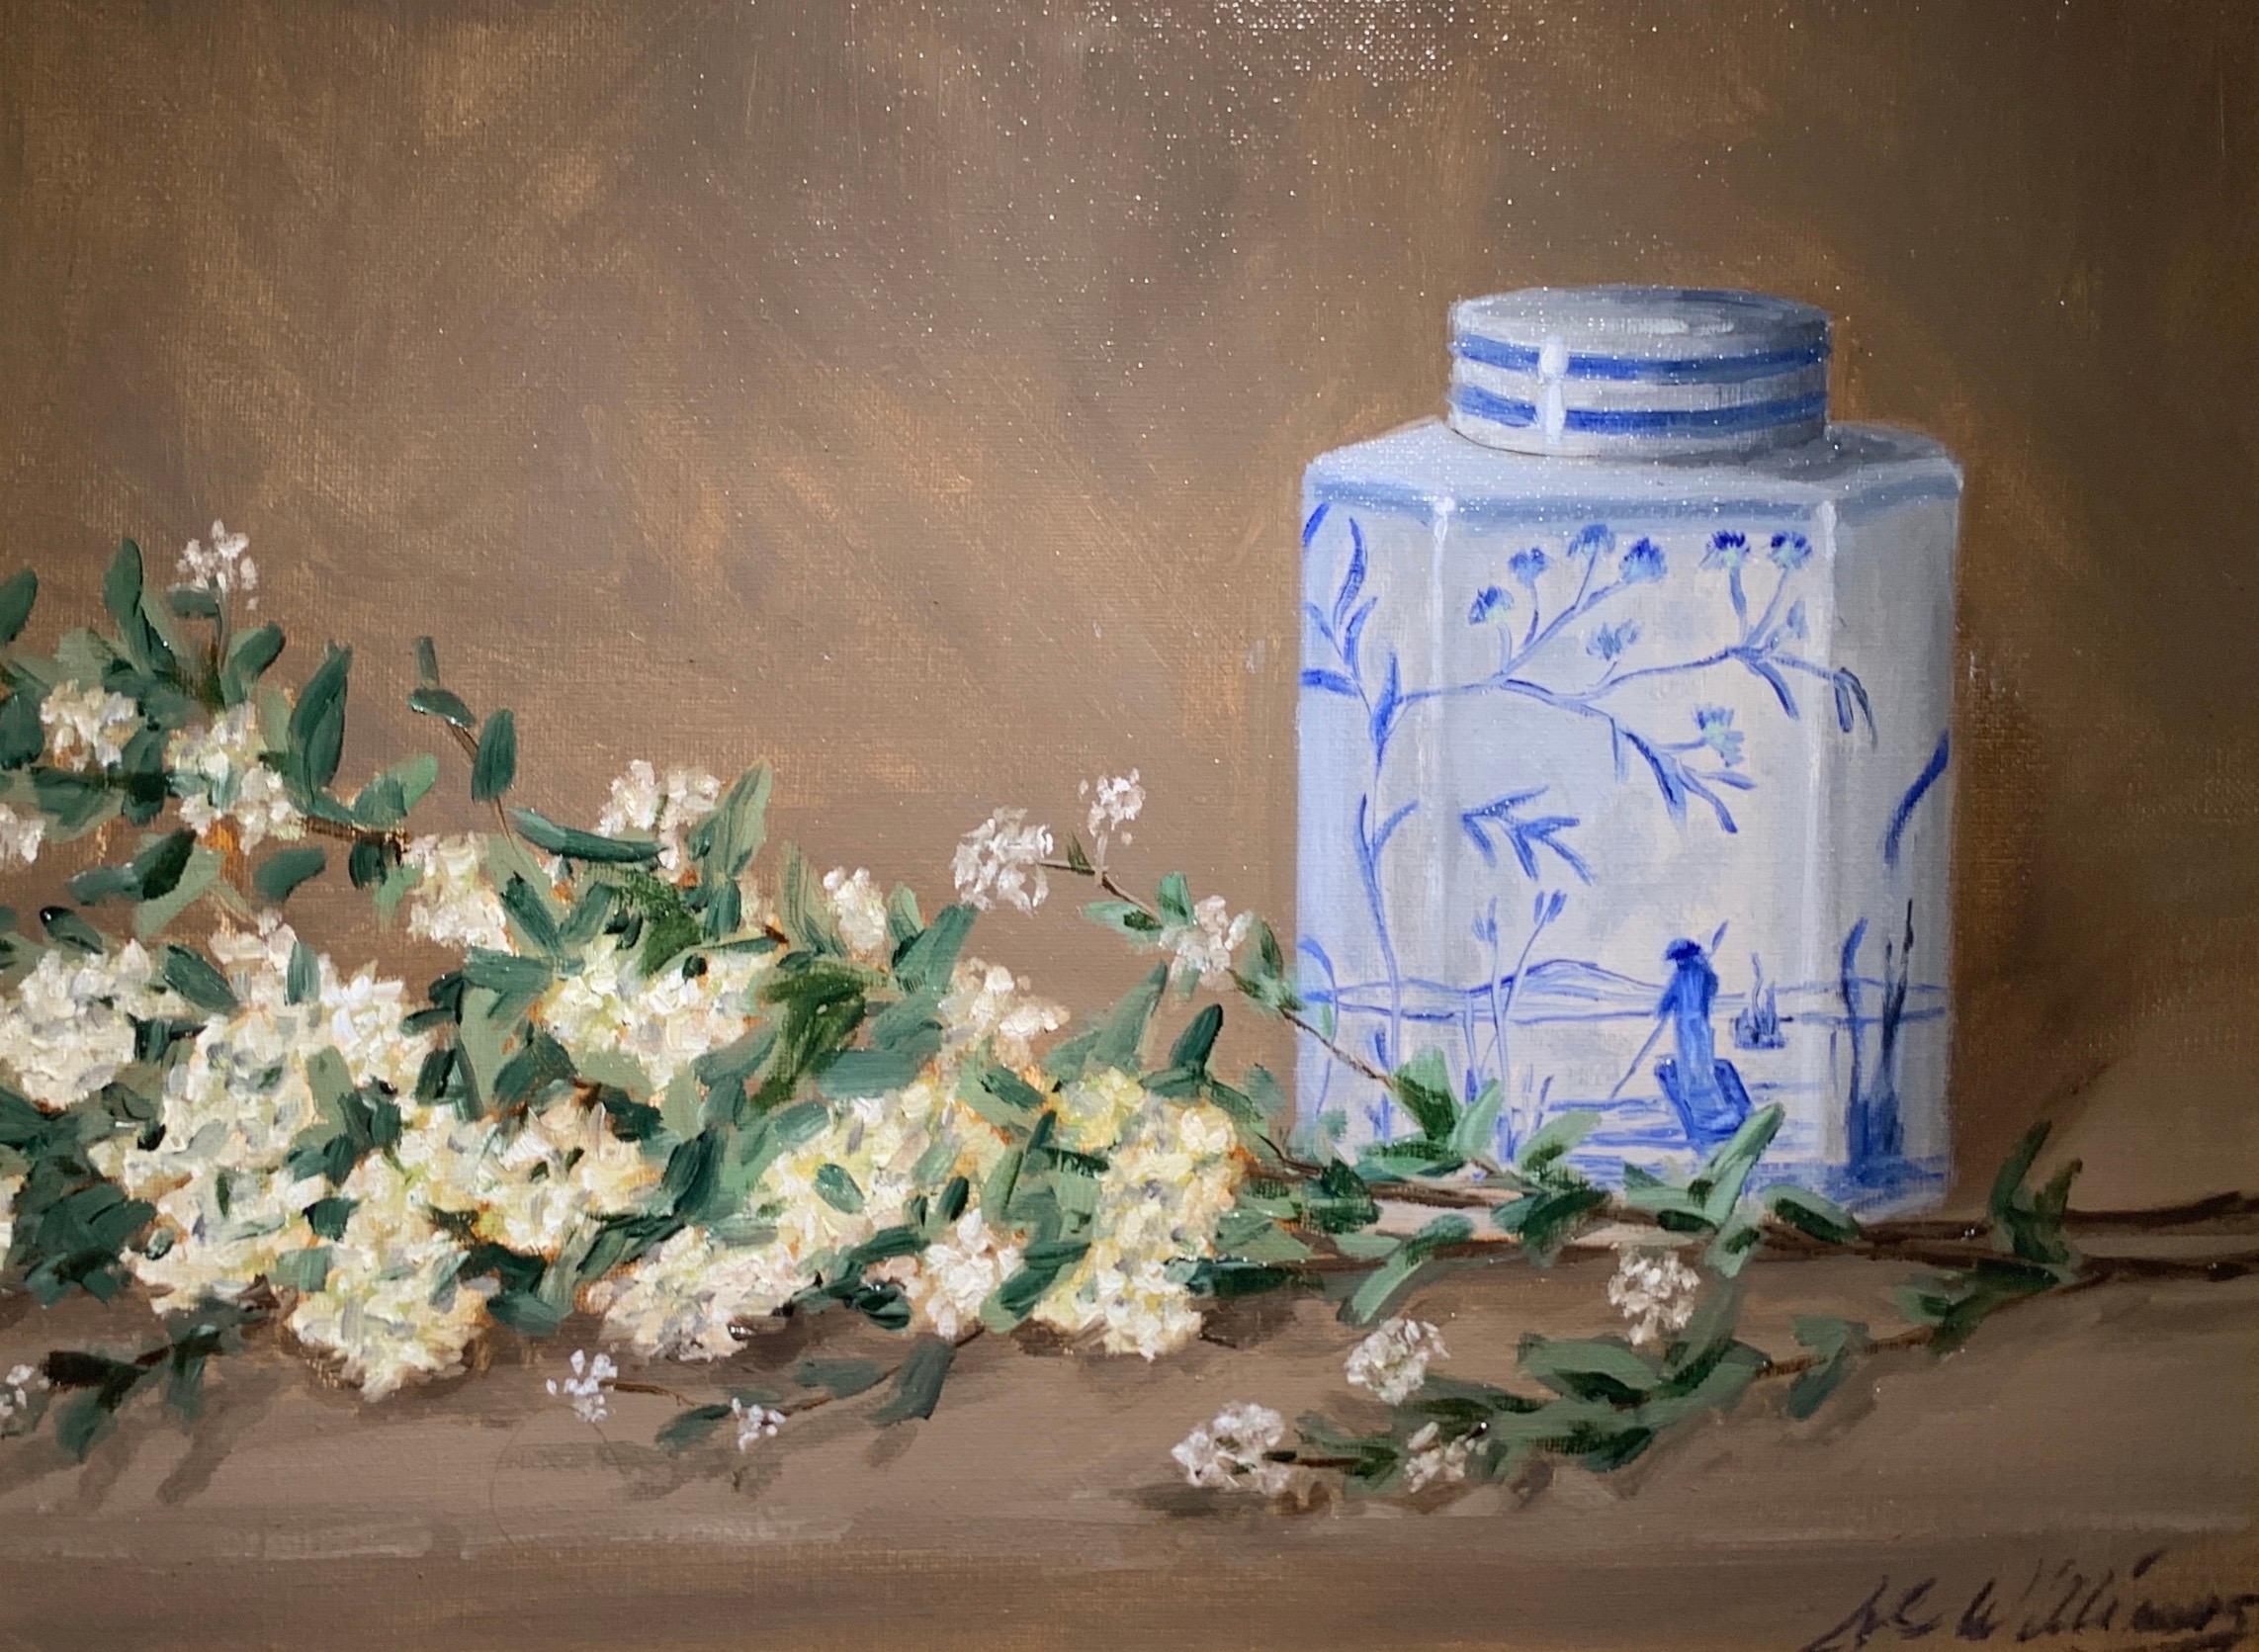 'Still Life With Blue and White' is a small framed representational oil on canvas still life painting created by American artist Ginny Williams in 2020. Featuring a palette made of blue, neutrals and white, accented by black and brown colors, the